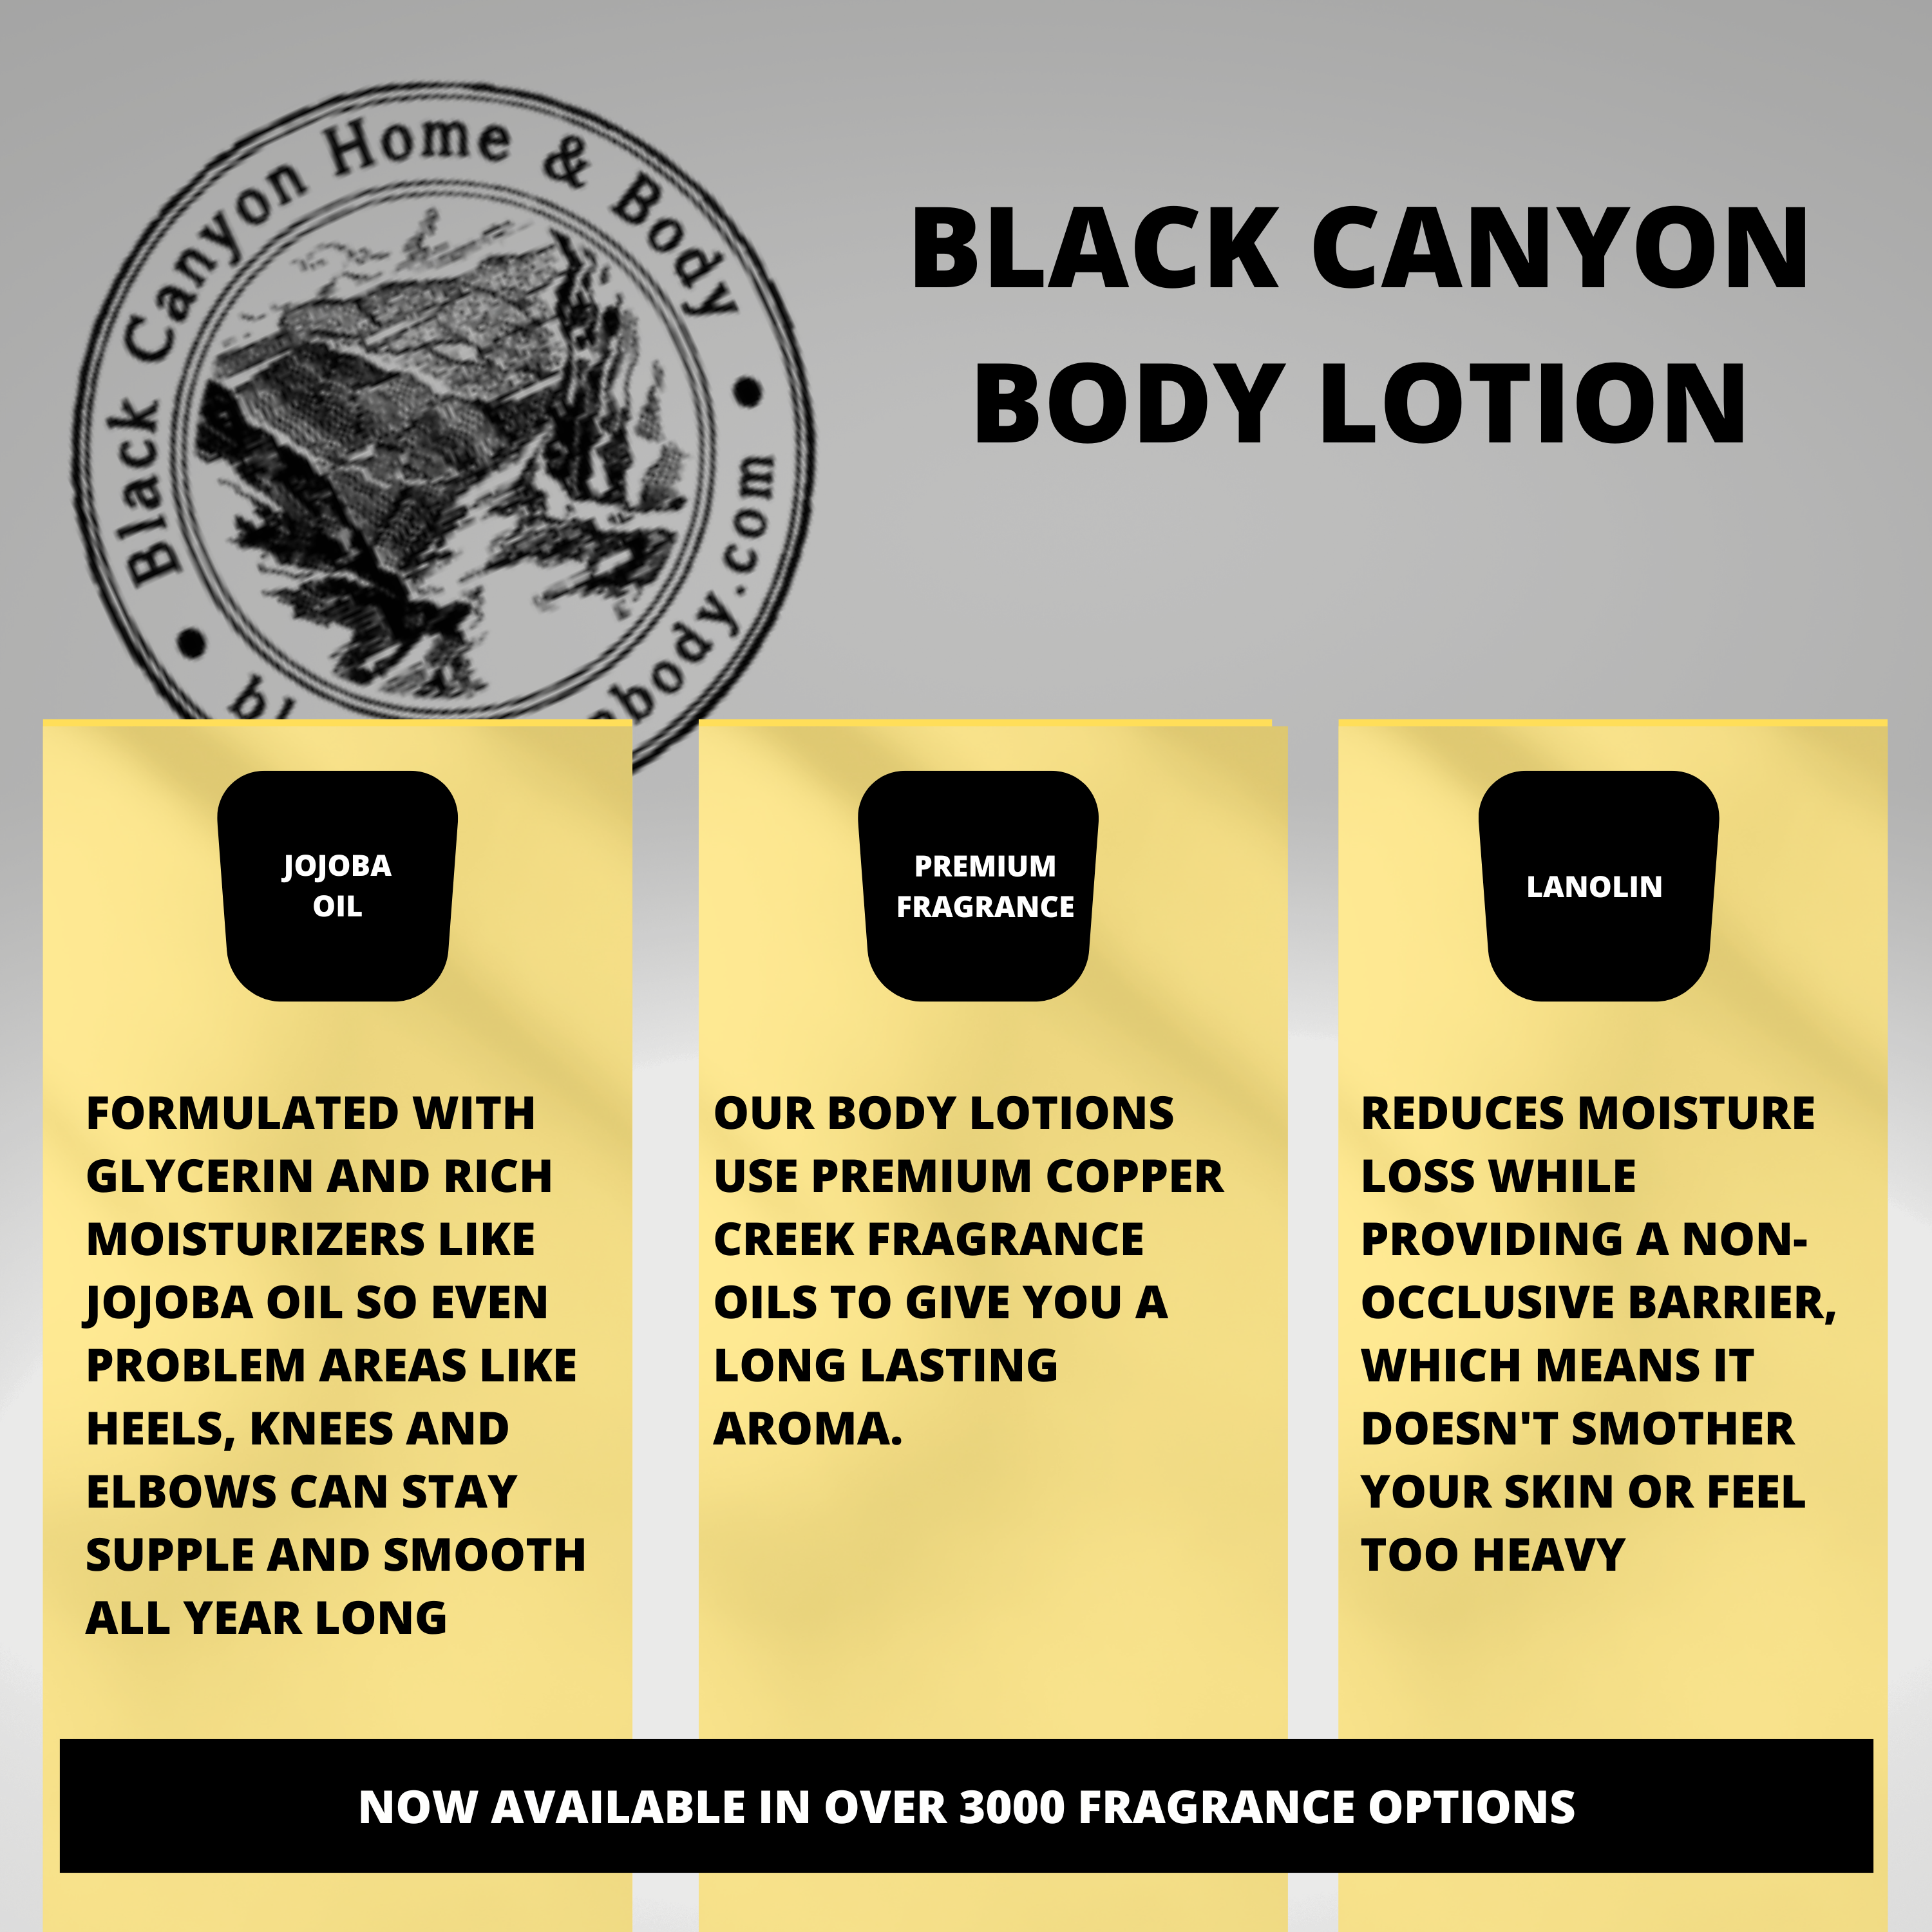 Black Canyon Amber Breeze Scented Luxury Body Lotion with Lanolin and Jojoba Oil